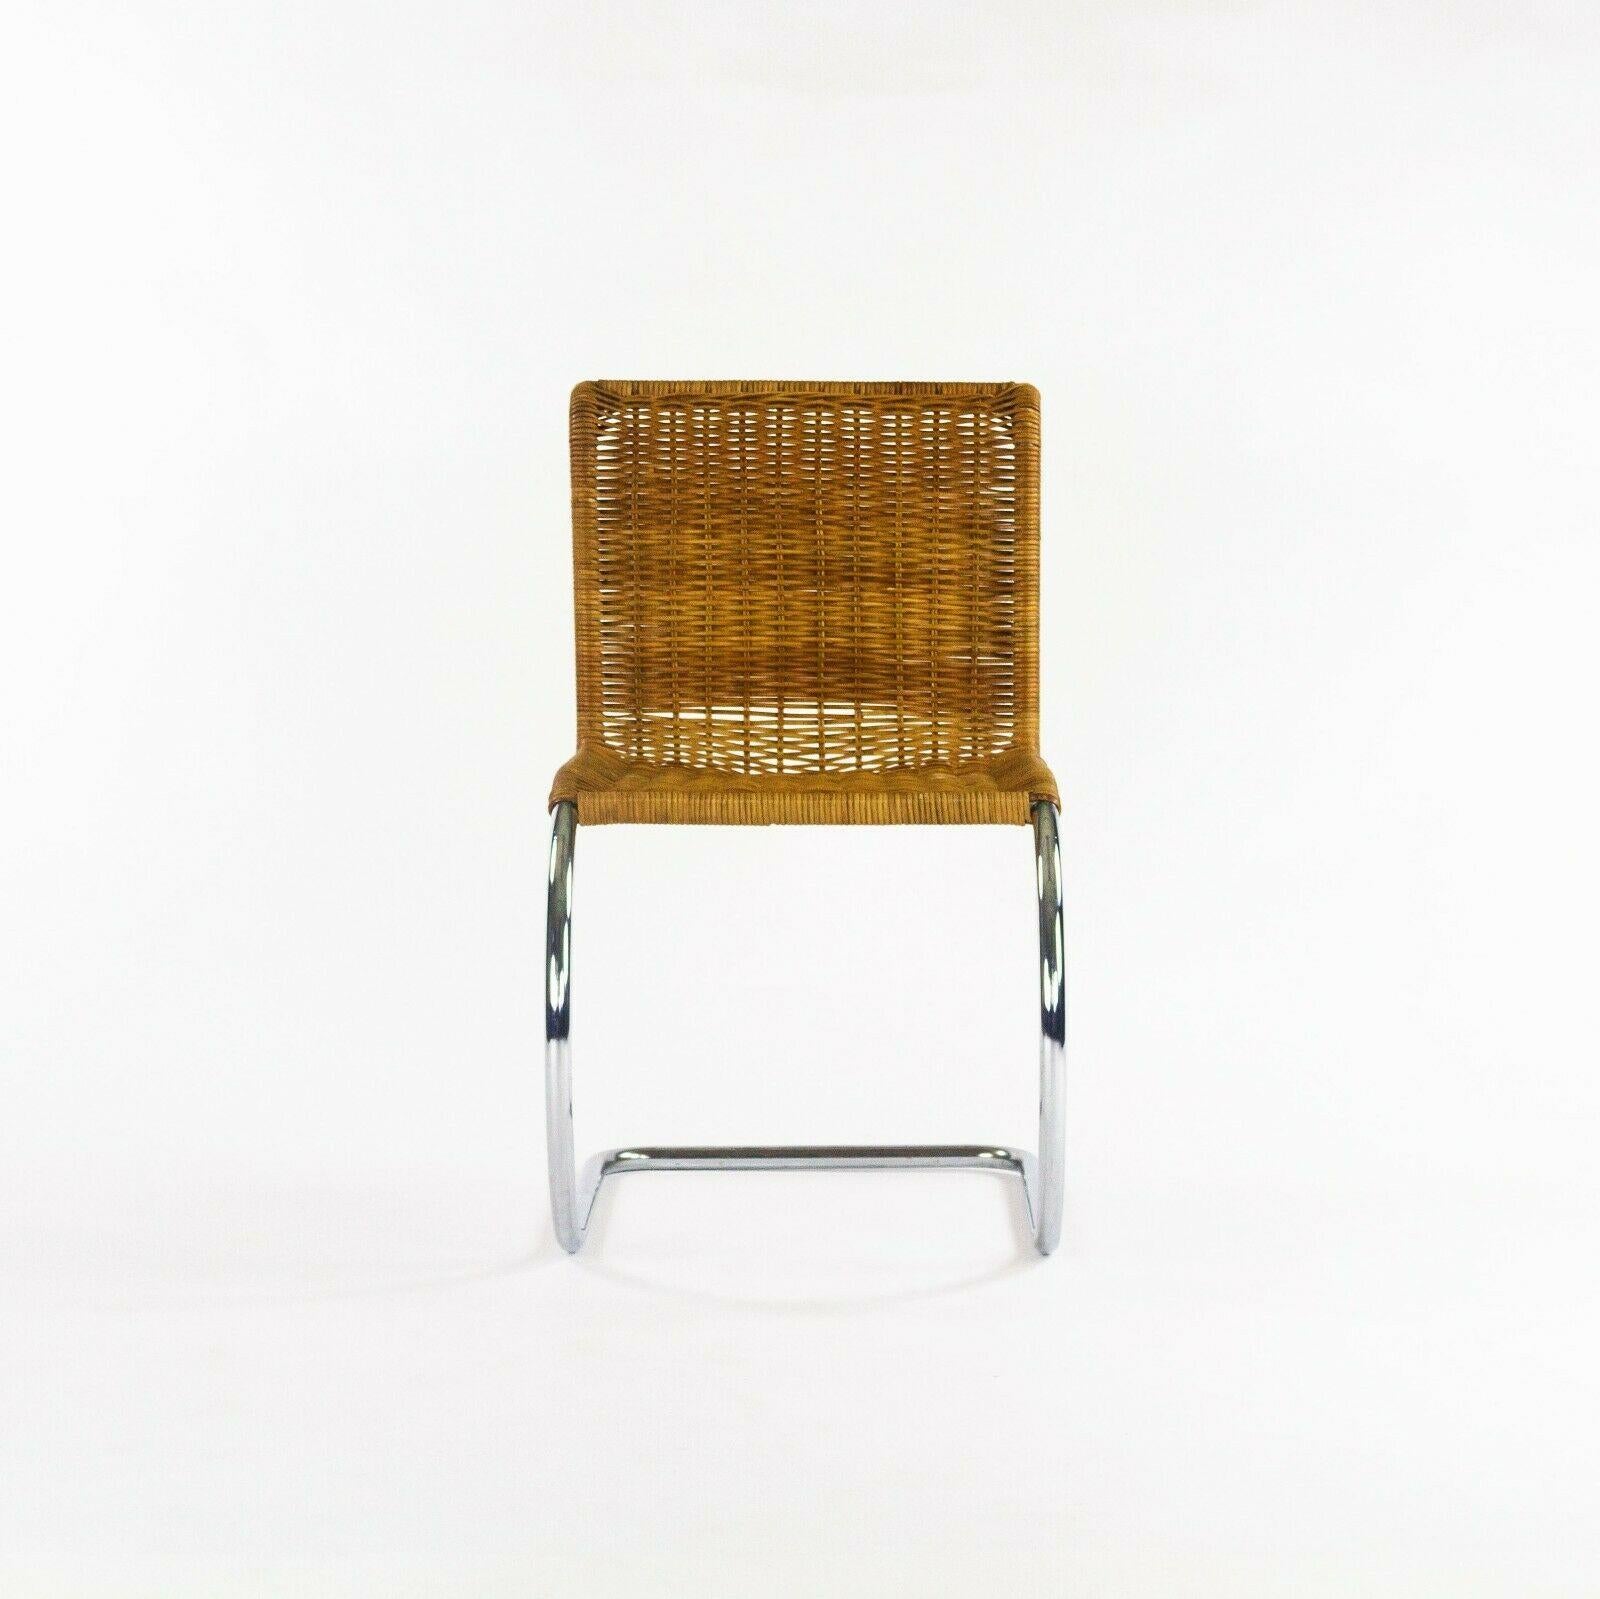 Listed for sale is a set of six 1970s vintage MR10 Chairs, designed by Mies Van Der Rohe and produced by Knoll International. These are gorgeous original examples, which still retain their original rattan seats. They are in very good to excellent